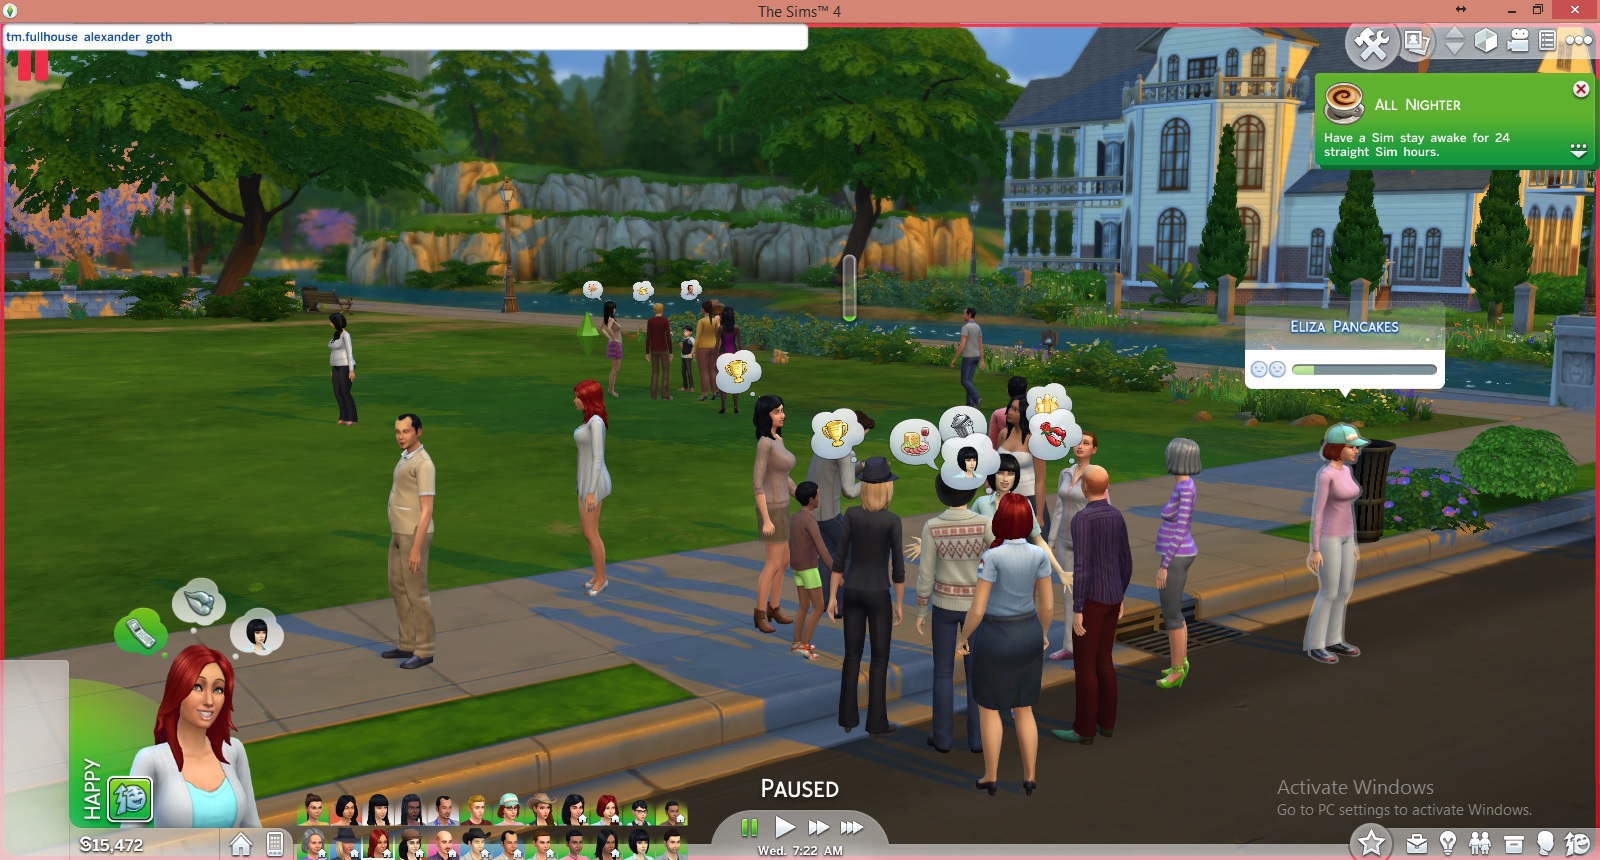 The Legacy Edition of The Sims 4 is being Discontinued